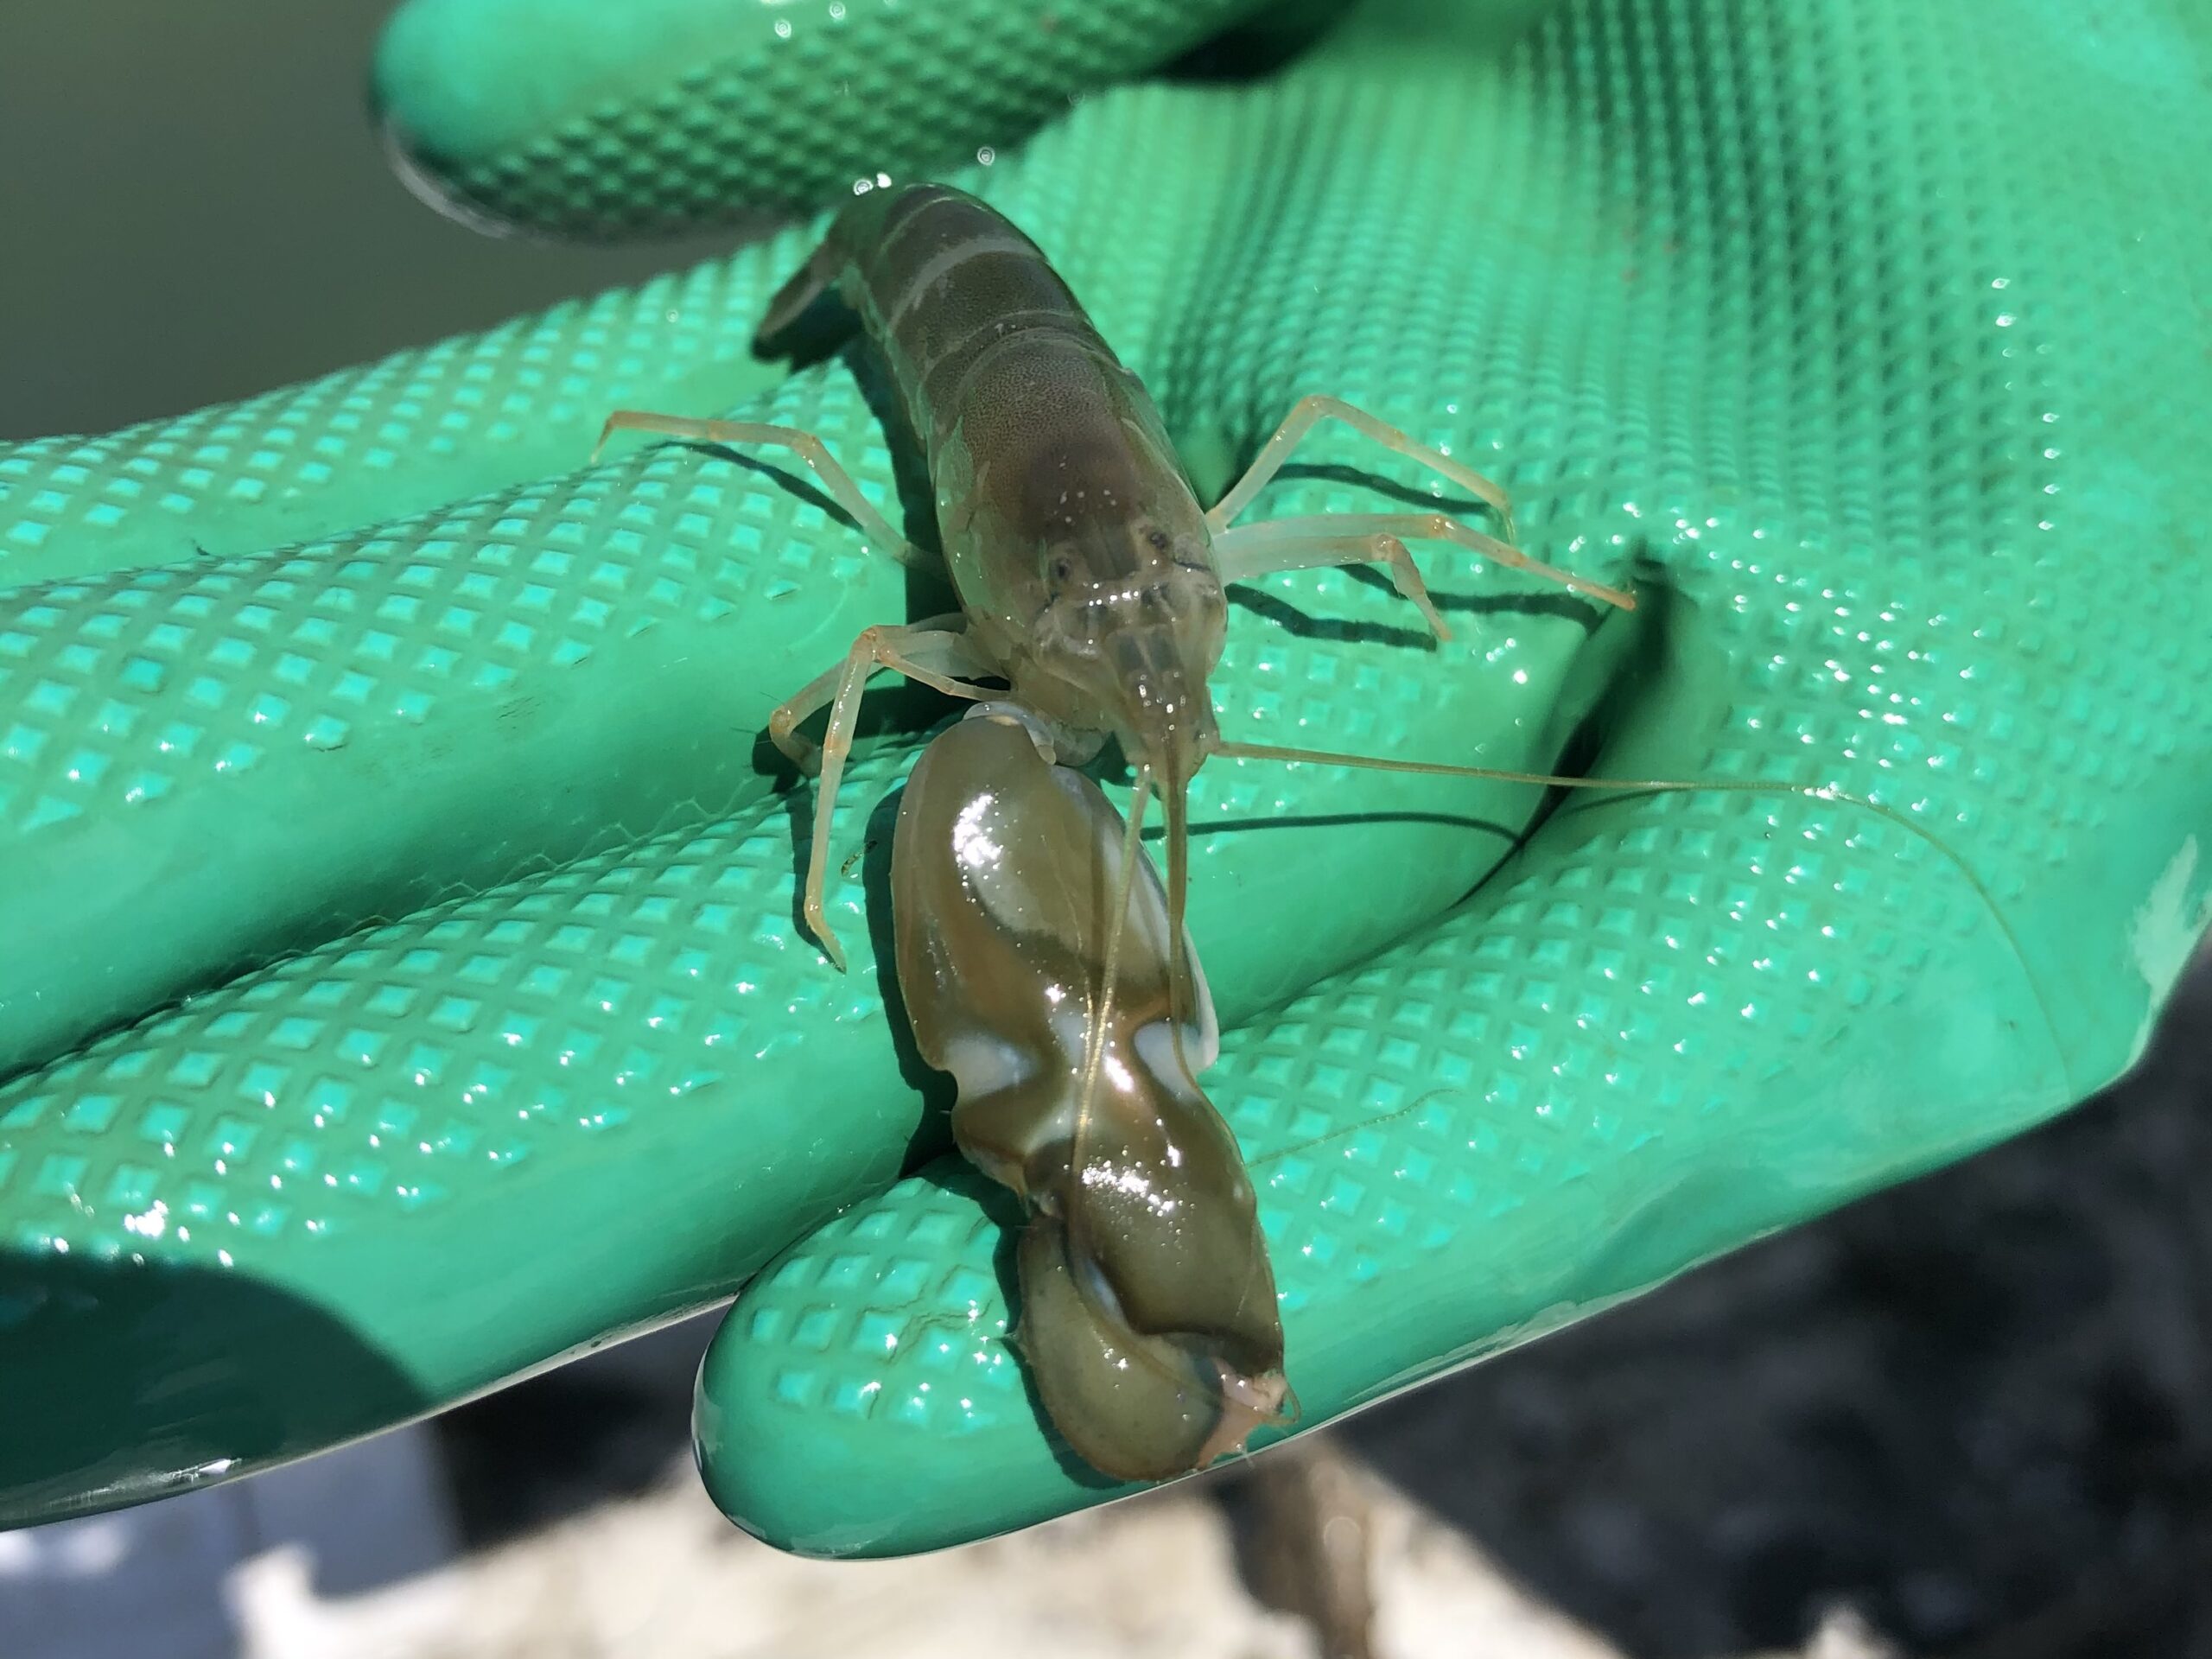 A shrimp with a massive claw that is the length of the rest of its body rests in the palm of a gloved hand.